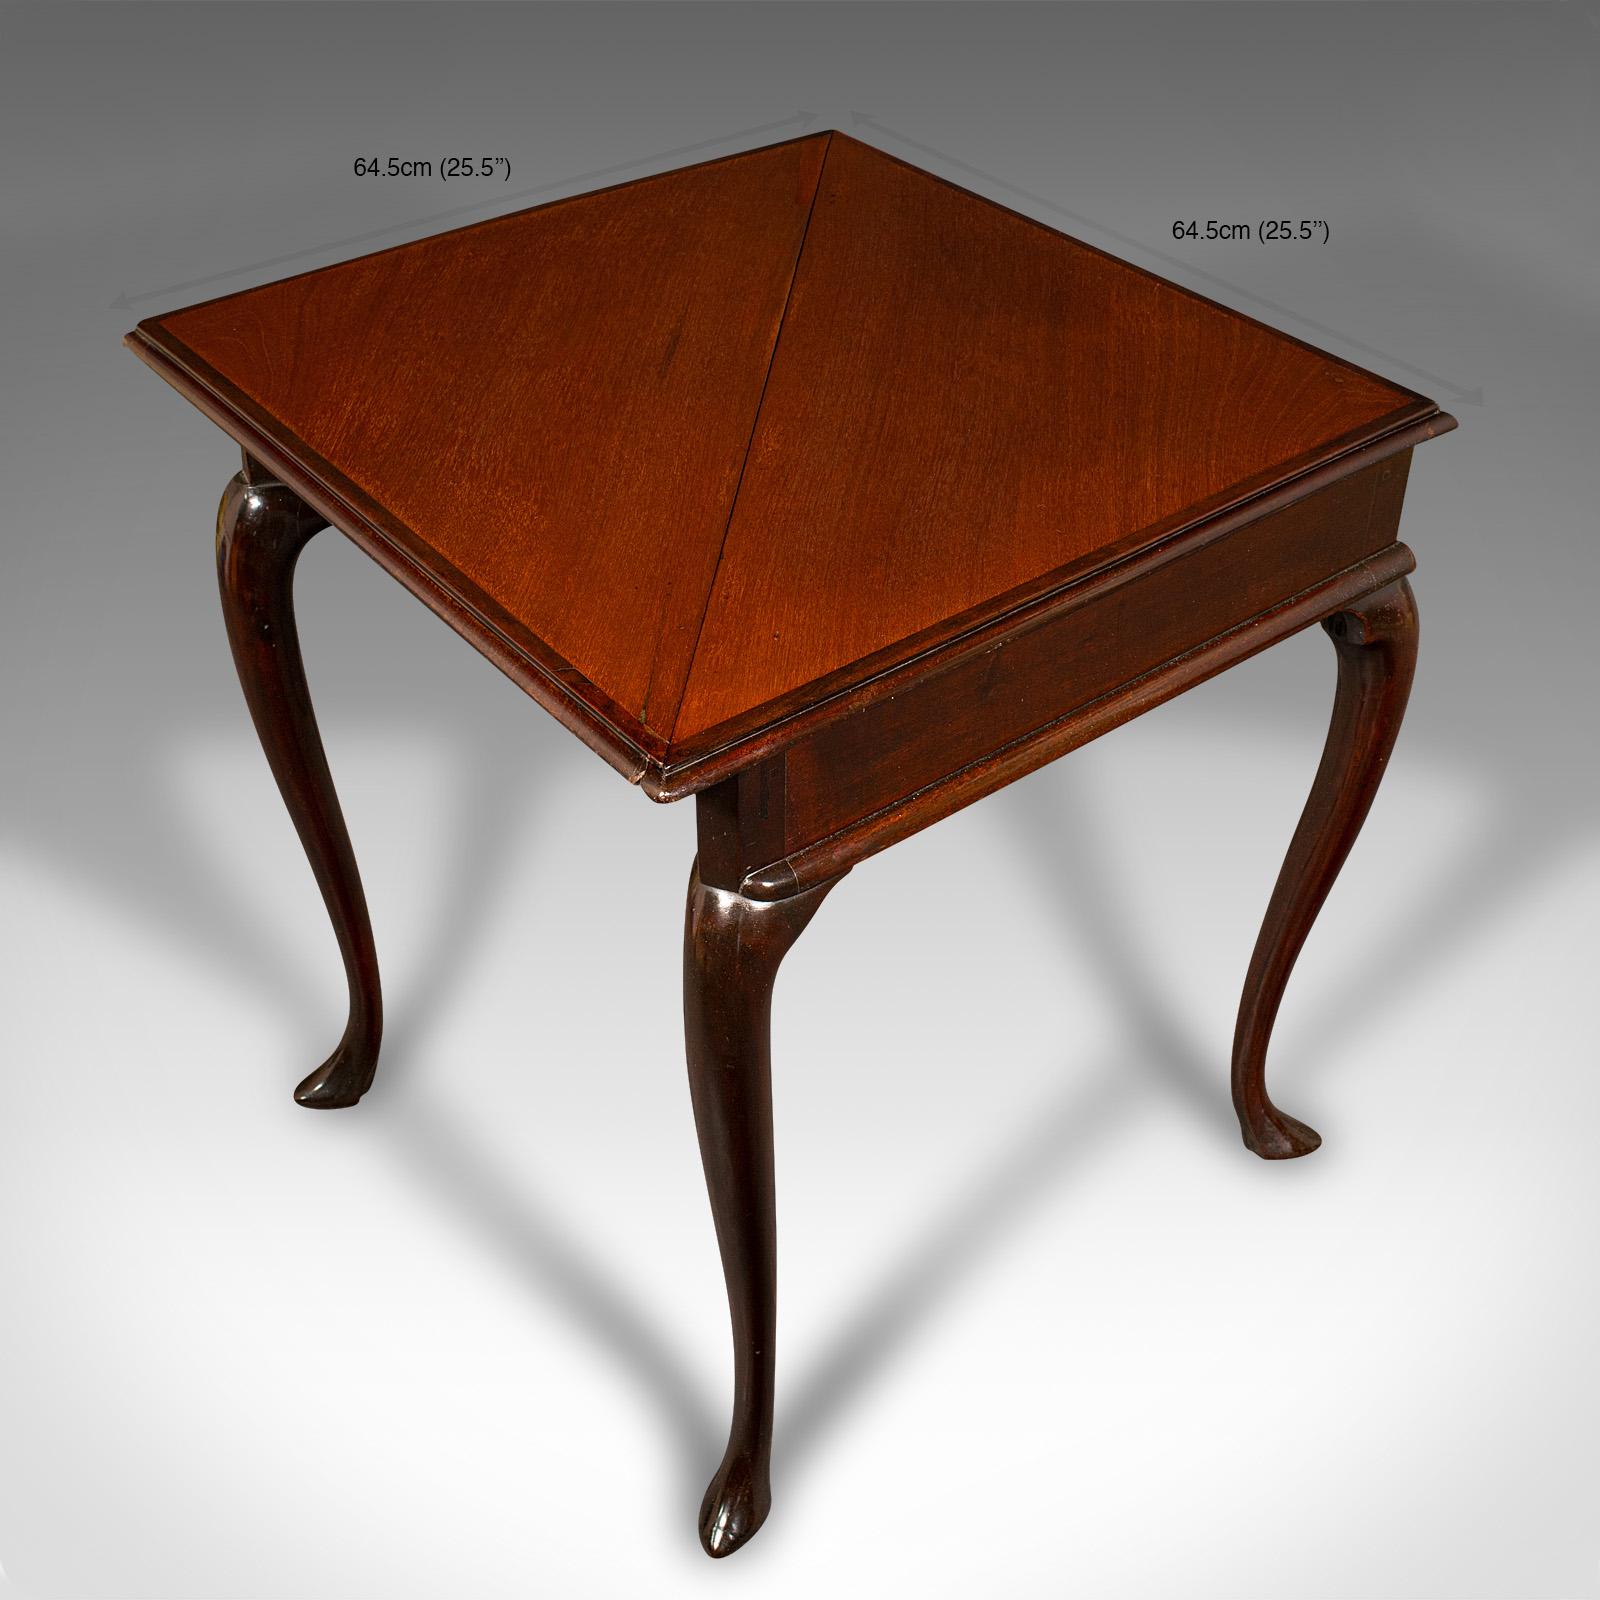 Antique Supper Table, English, Folding, Occasional, Display, Georgian, C.1770 For Sale 5